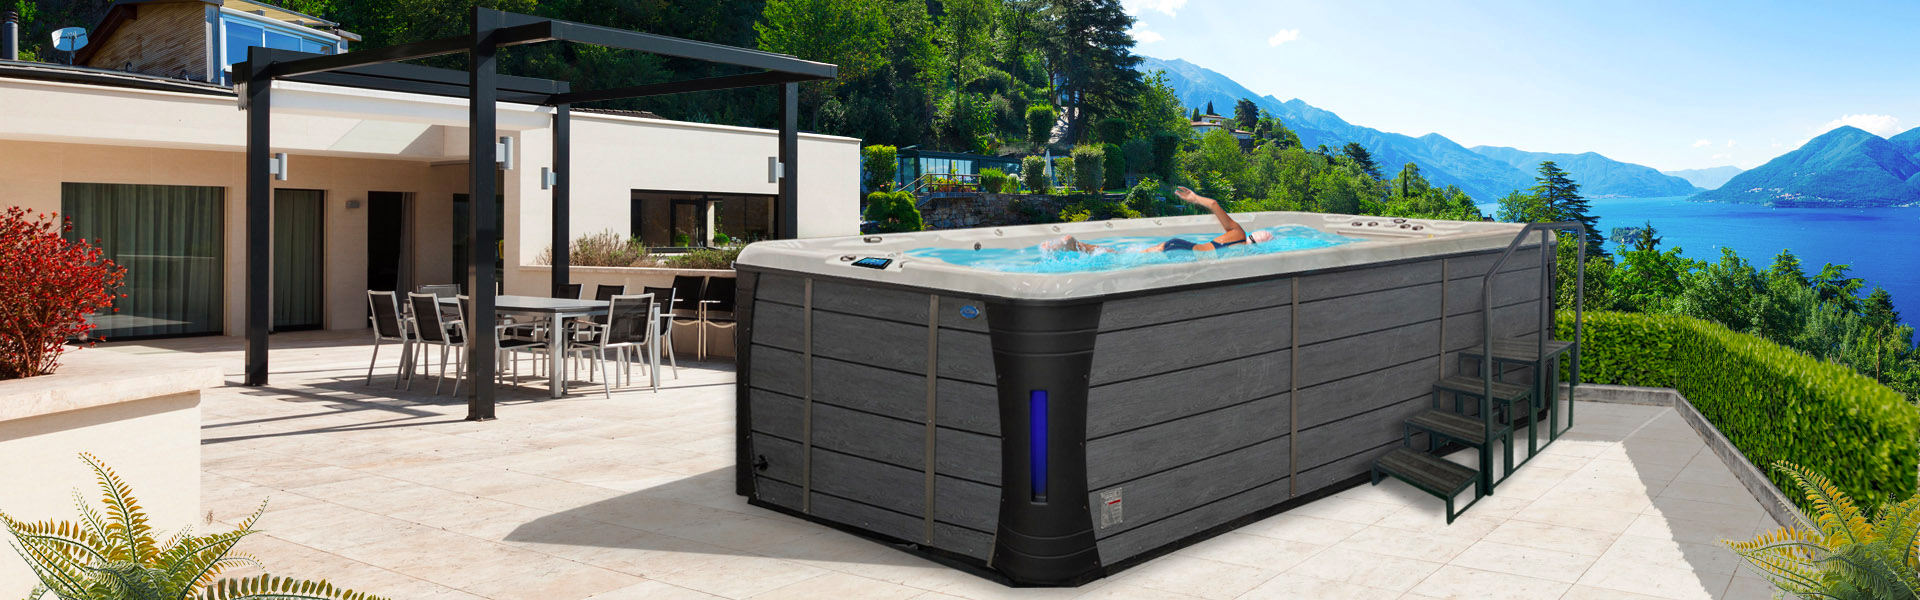 The Cost Savings of Installing a Swim Spa